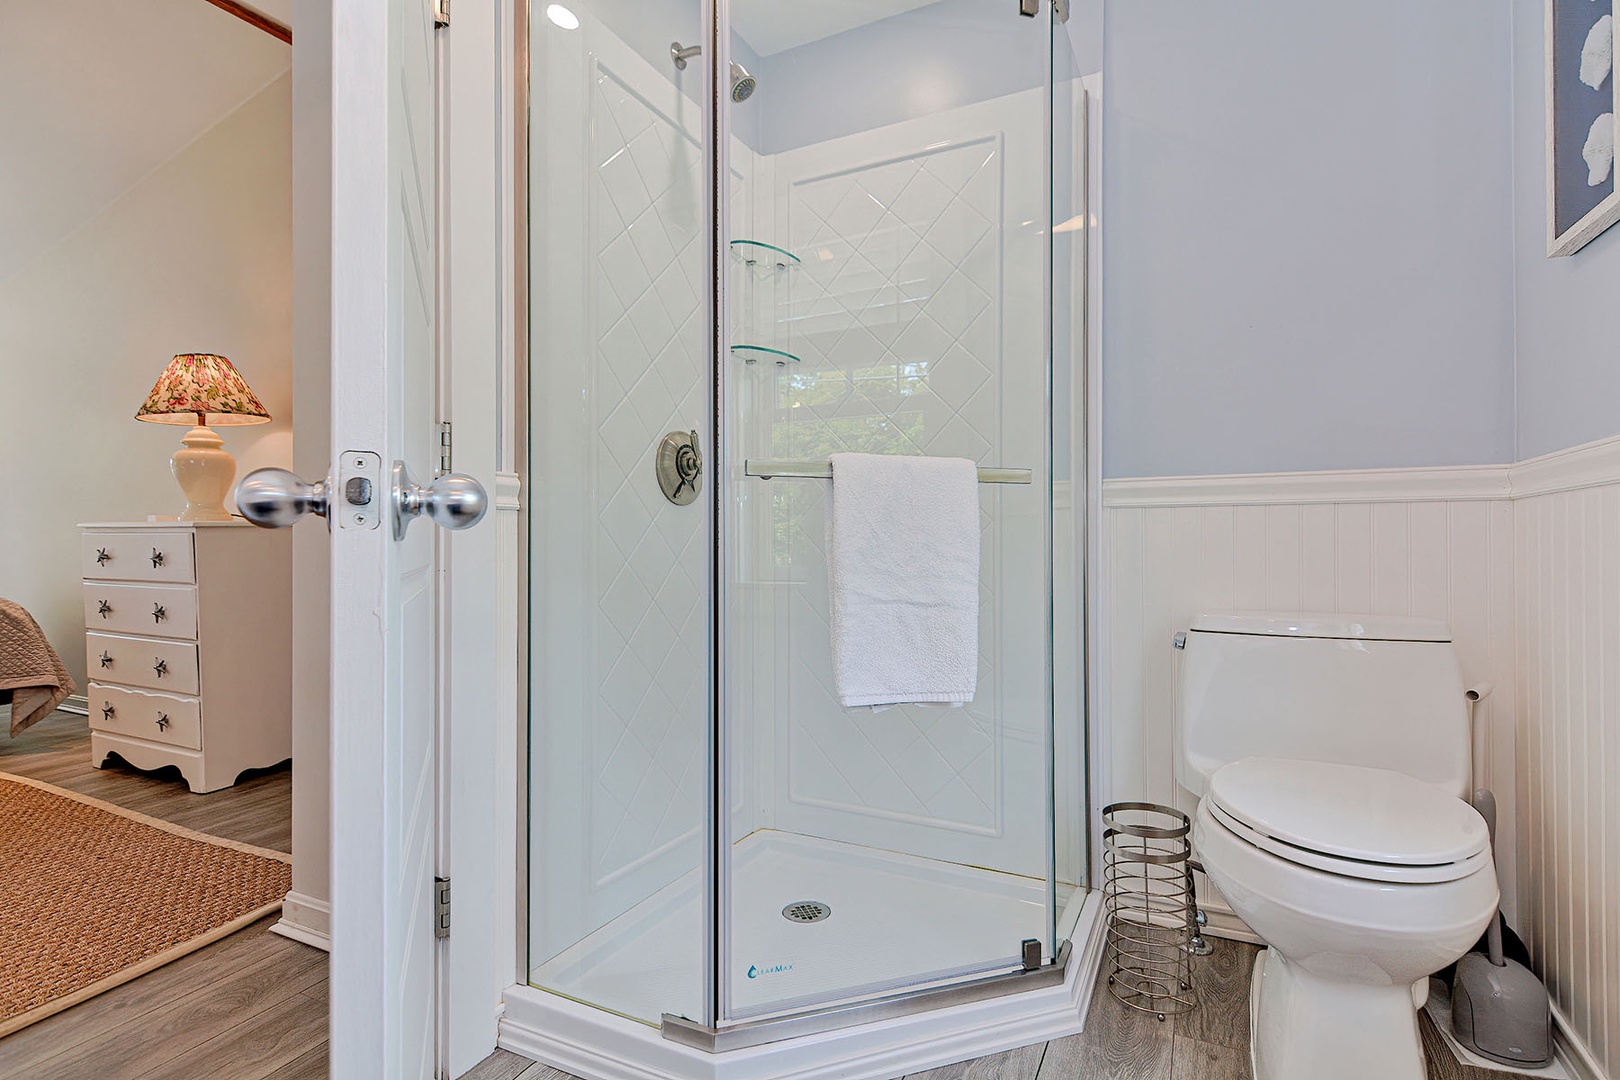 The Primary ensuite bath is a full bath with walk-in shower.